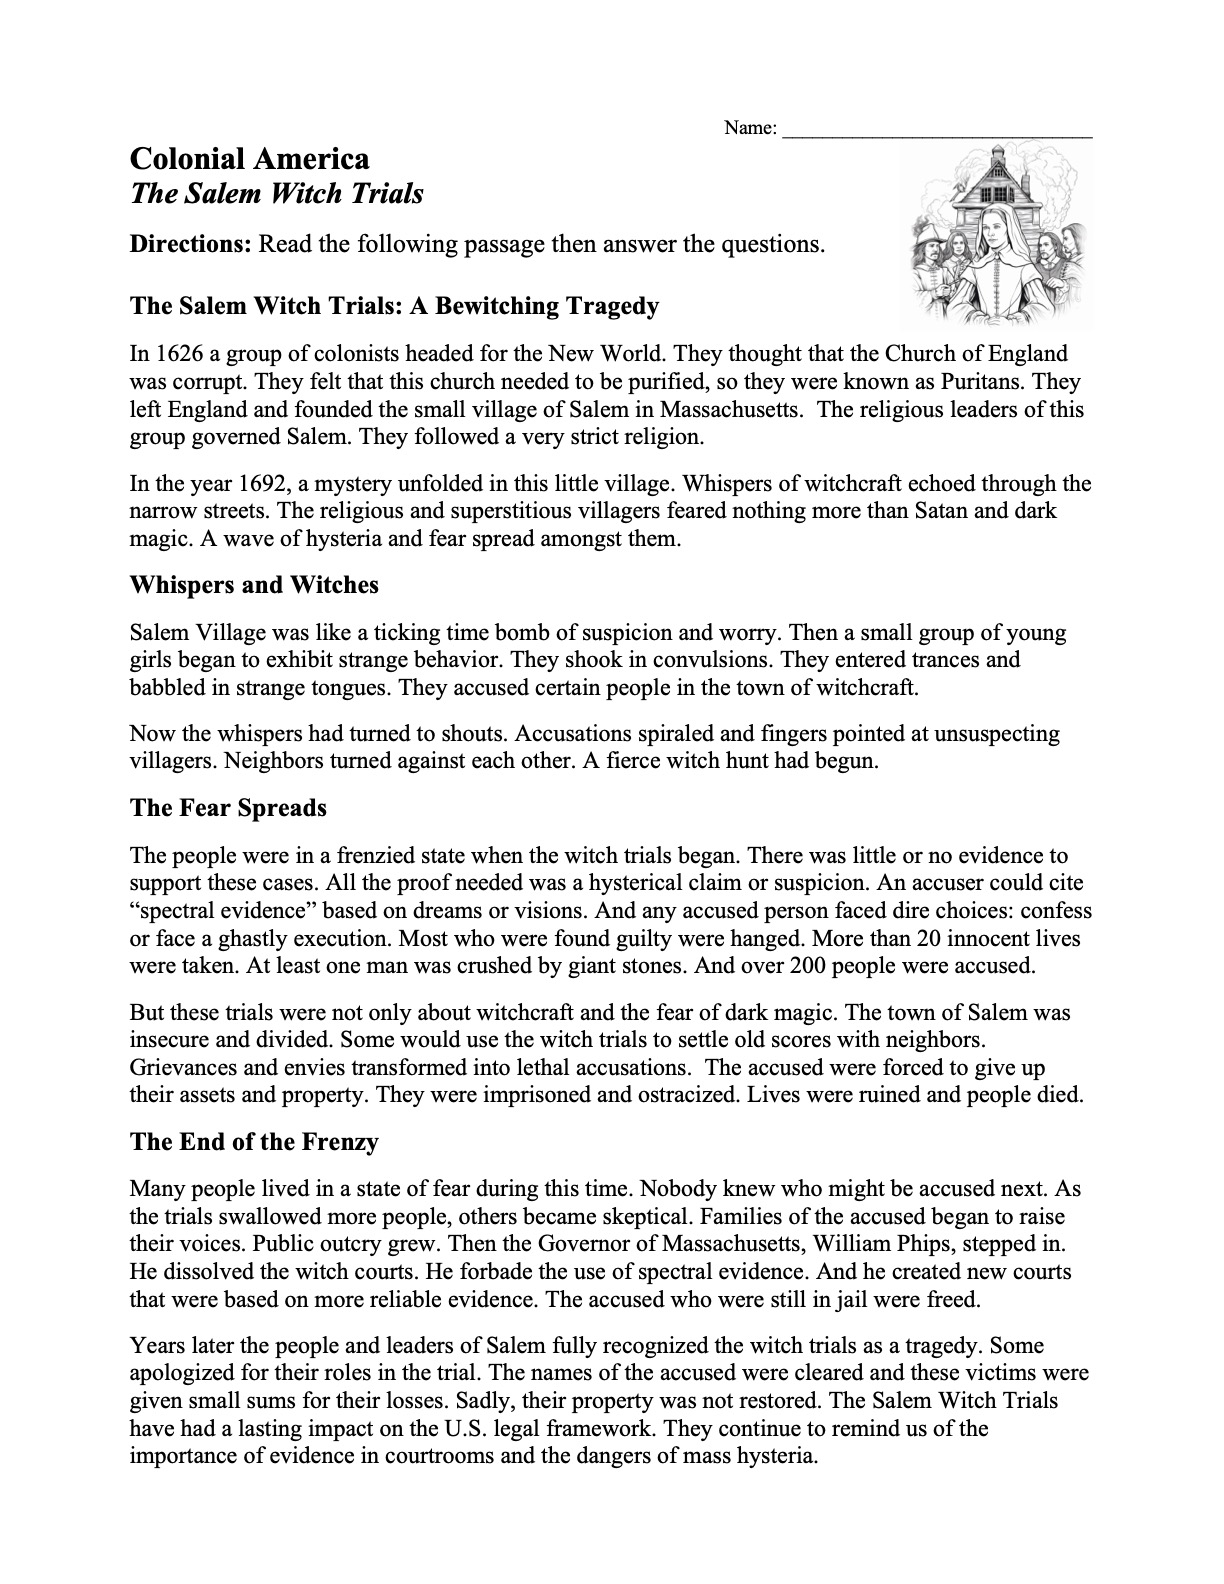 This is a preview image of our The Salem Witch Trials Worksheet. Click on it to enlarge this image and view the source file.